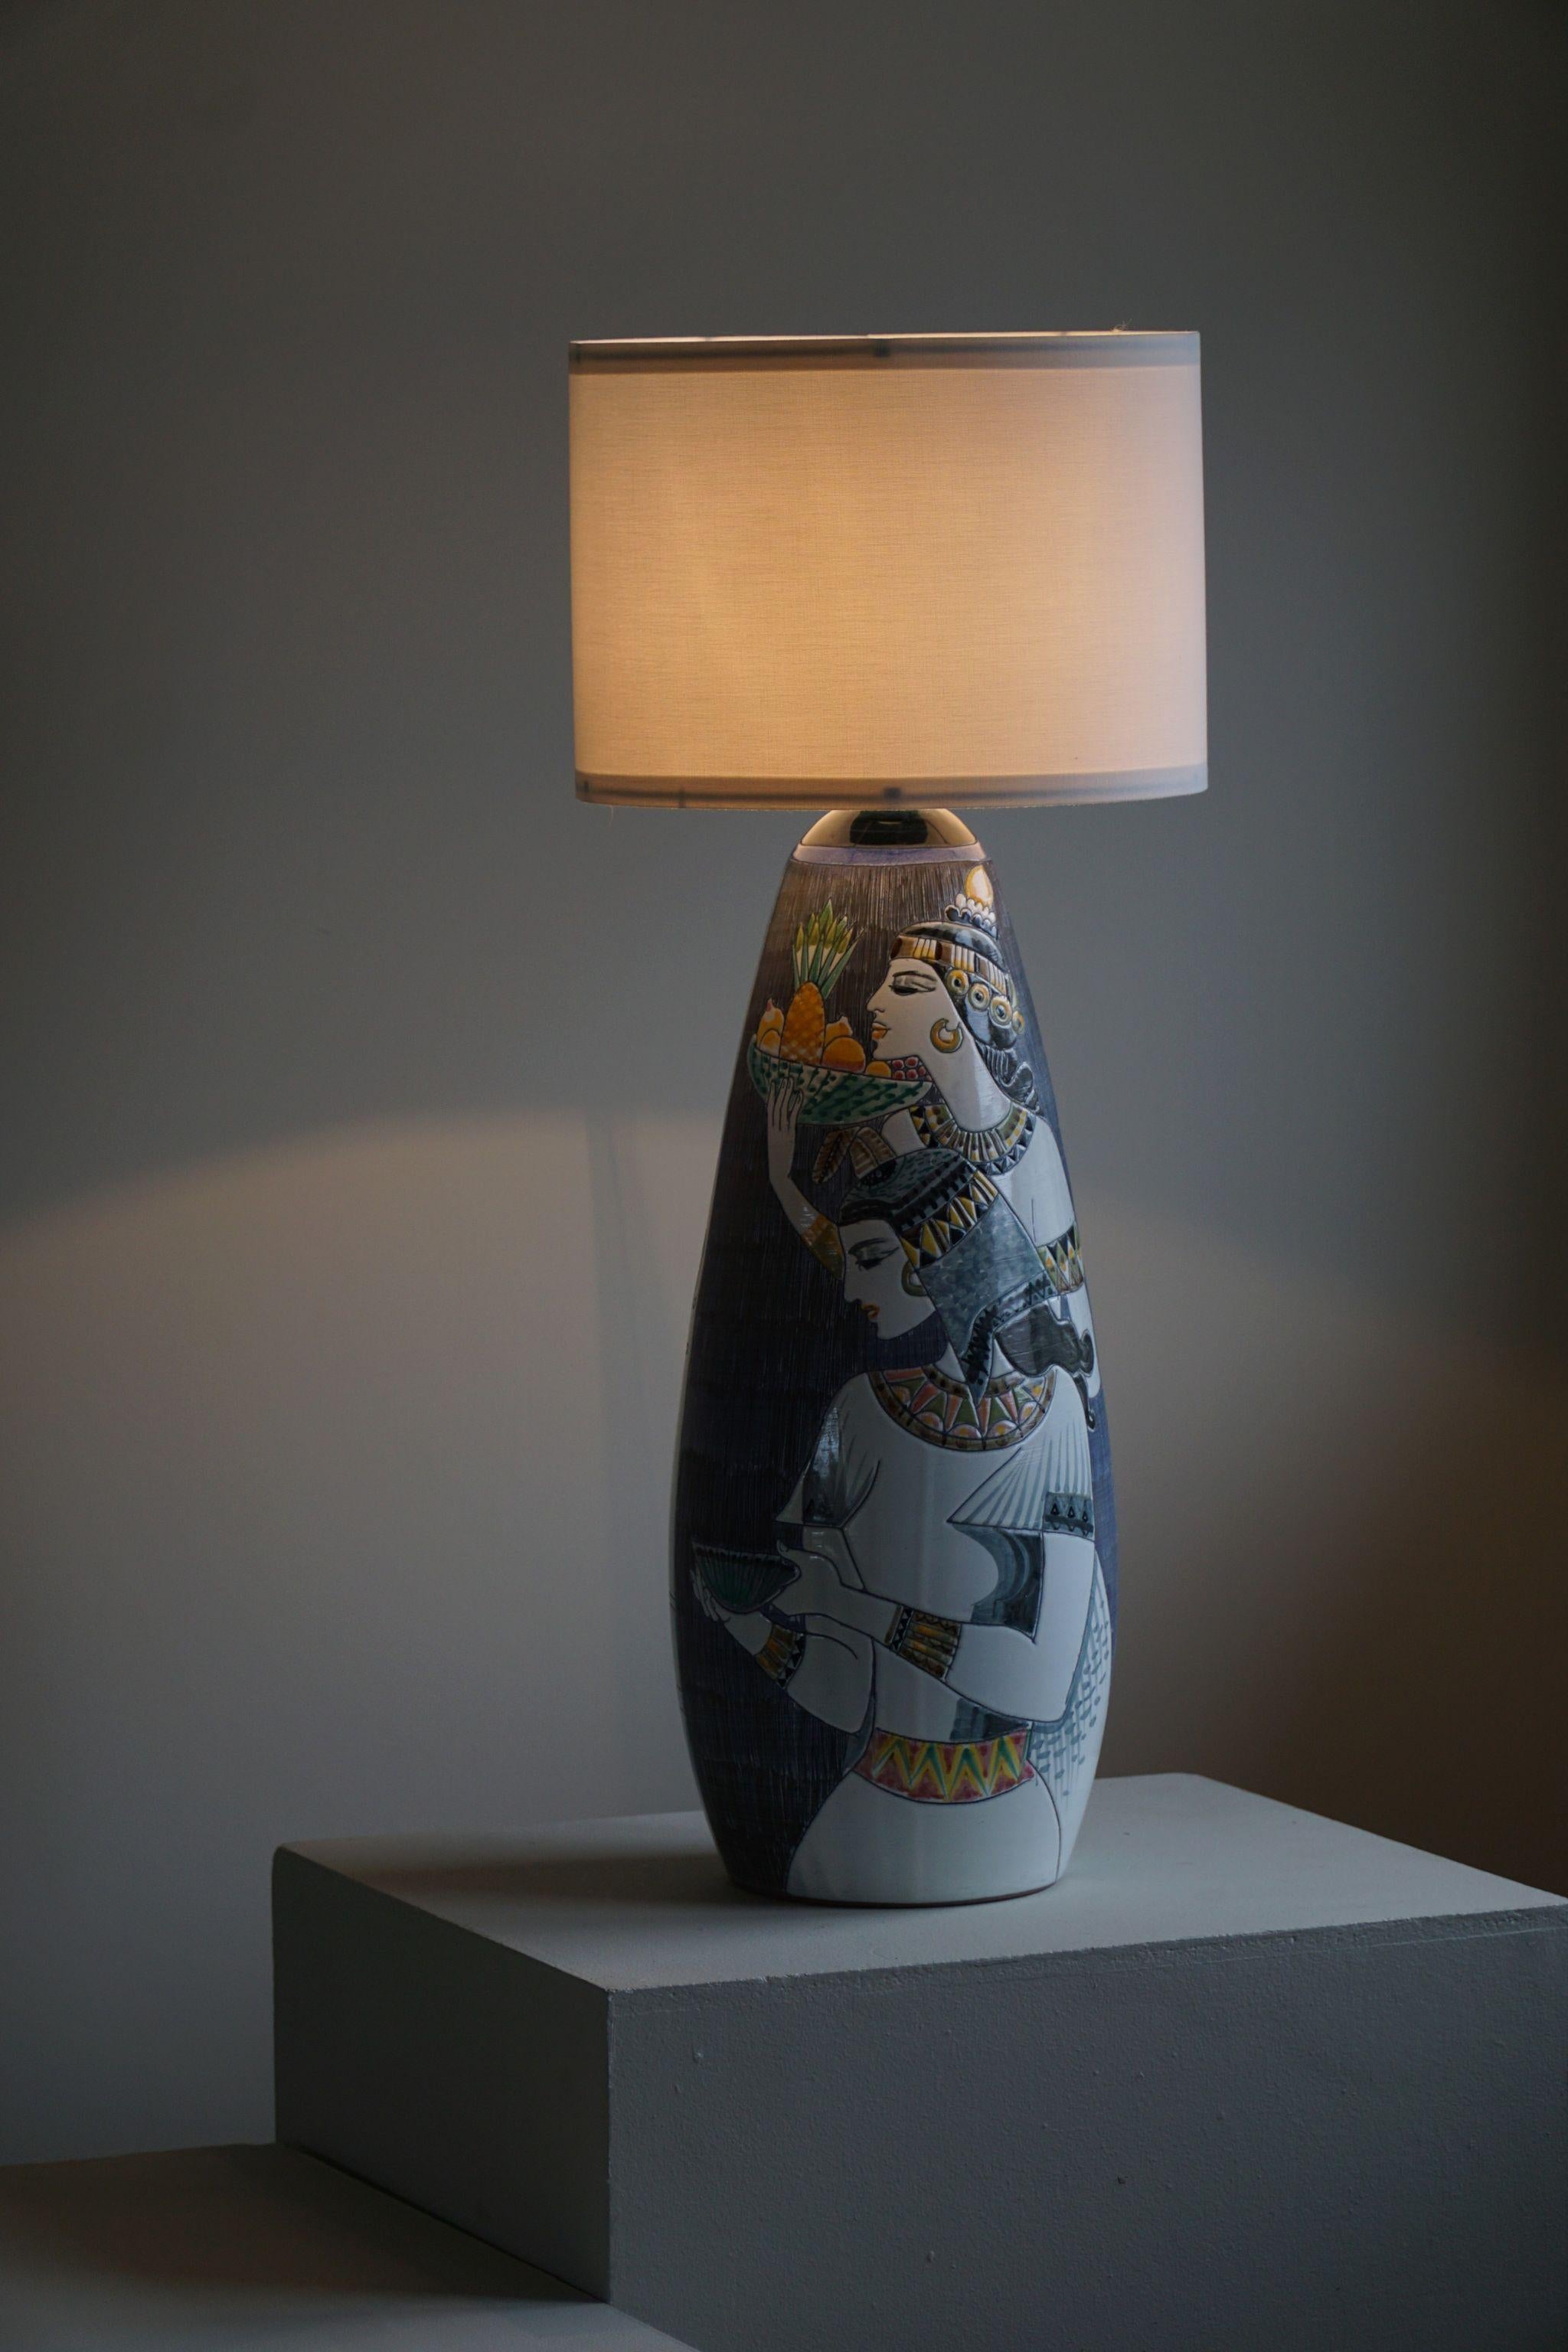 Intriguing large hand decorated ceramic floor lamp. Rich details such as the two figurative humans realized in sgraffito technique.
Designed by Marian Zawadzki, model 